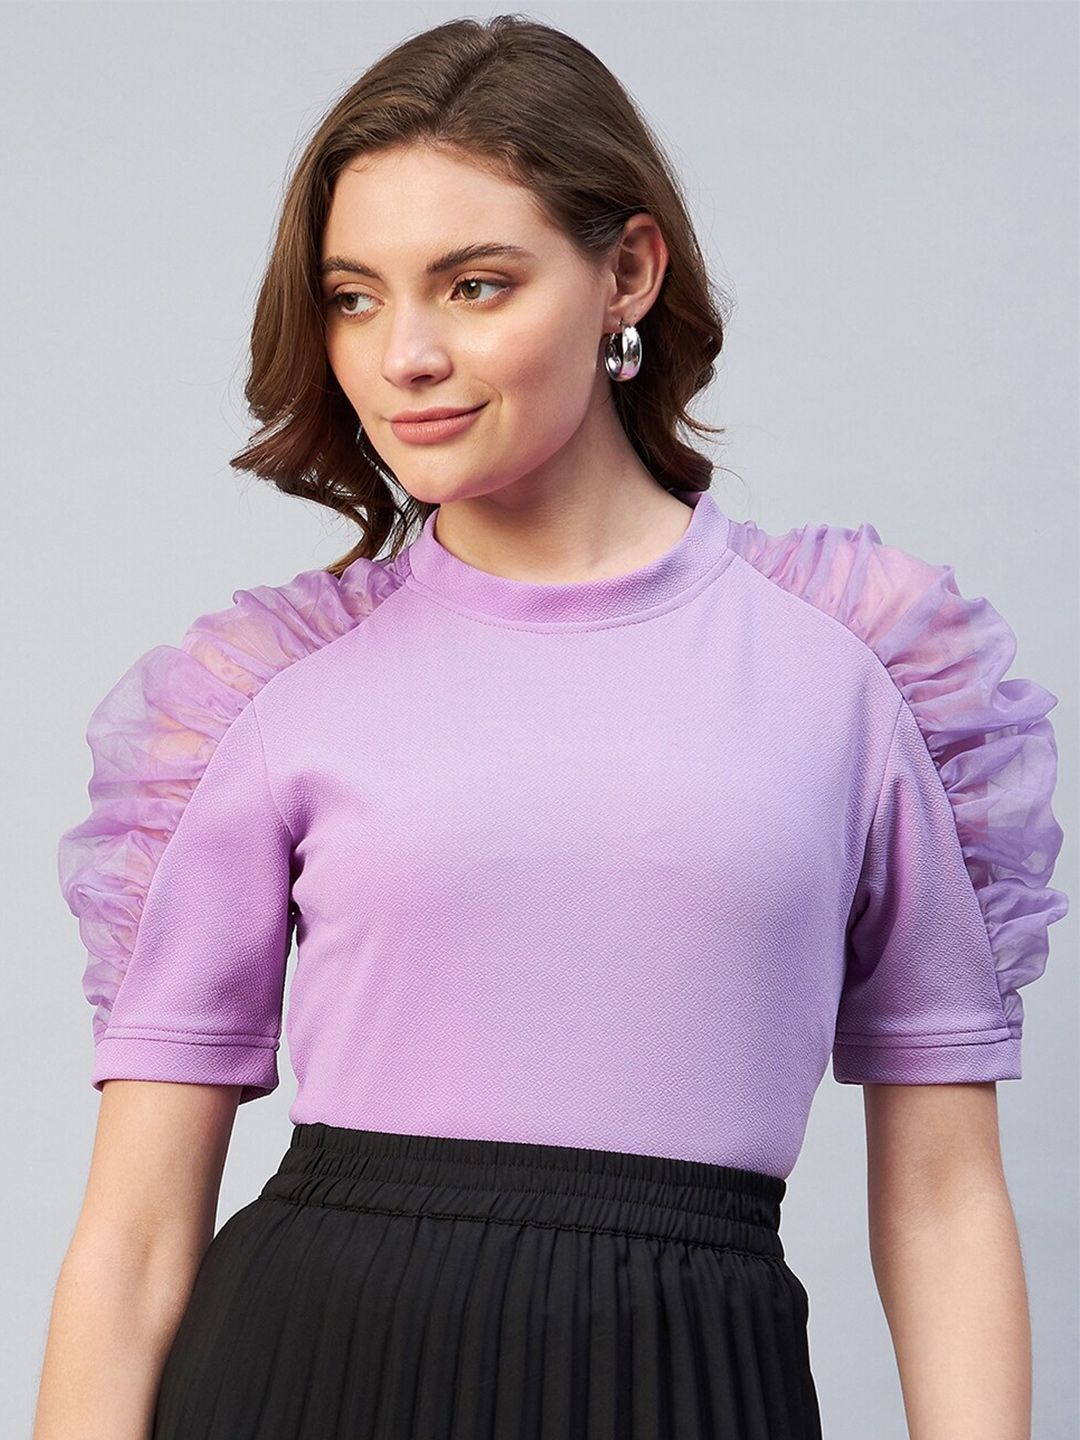 Marie Claire Lavender Puff Sleeves Top Price in India